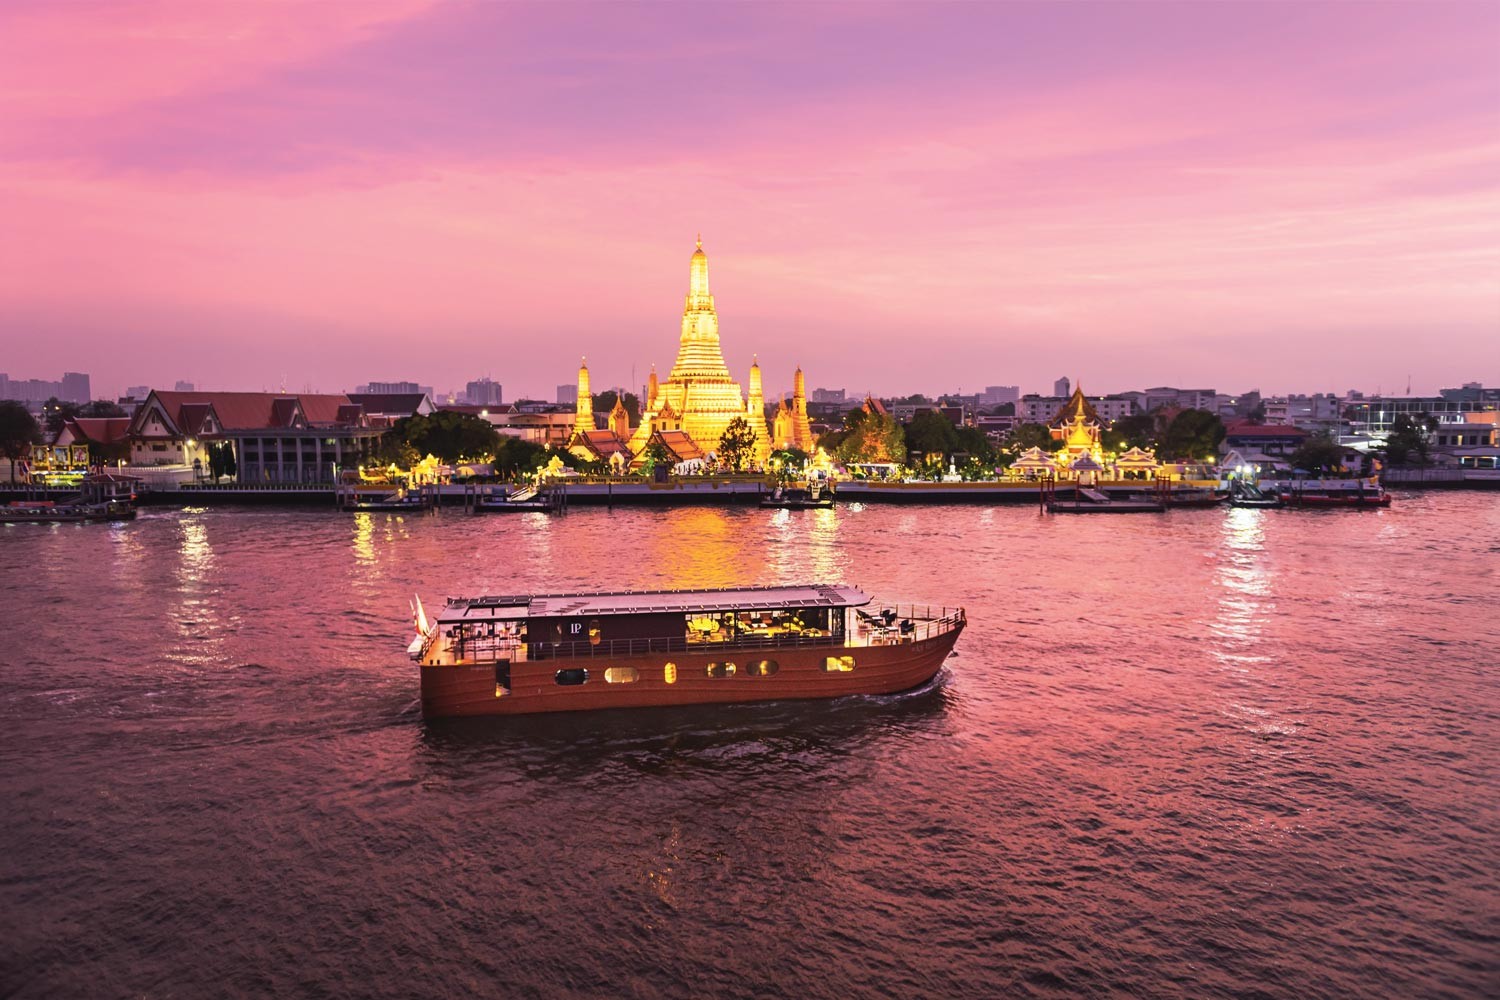 Loy River Song River Cruise: Maiden Journey To The Lost Kingdom of Ayutthaya